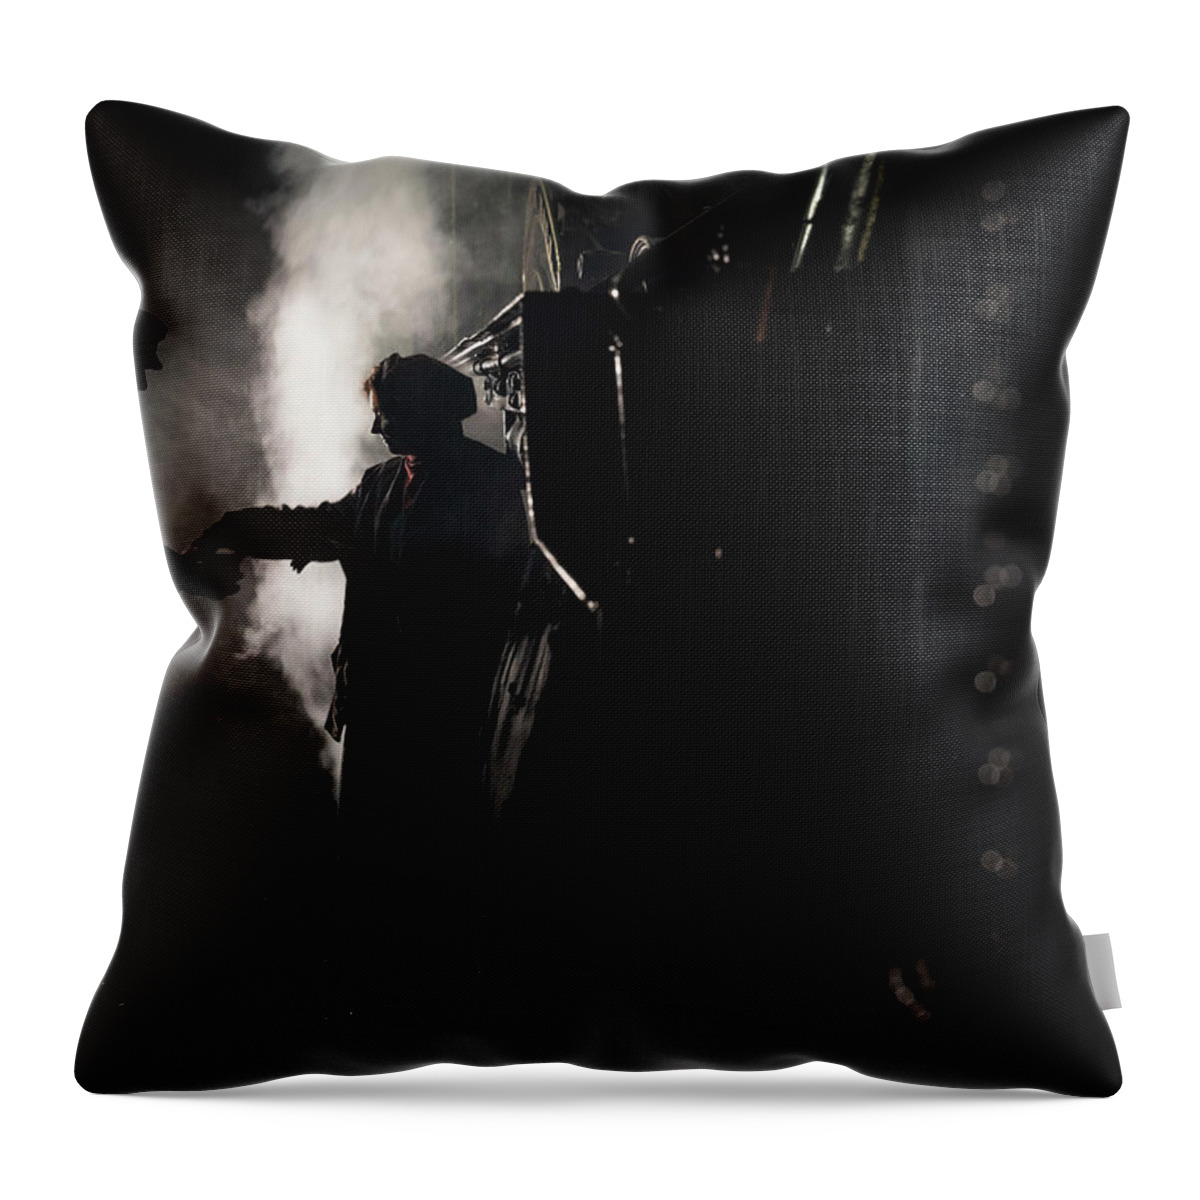 Railway Throw Pillow featuring the photograph Tea Break by Framing Places